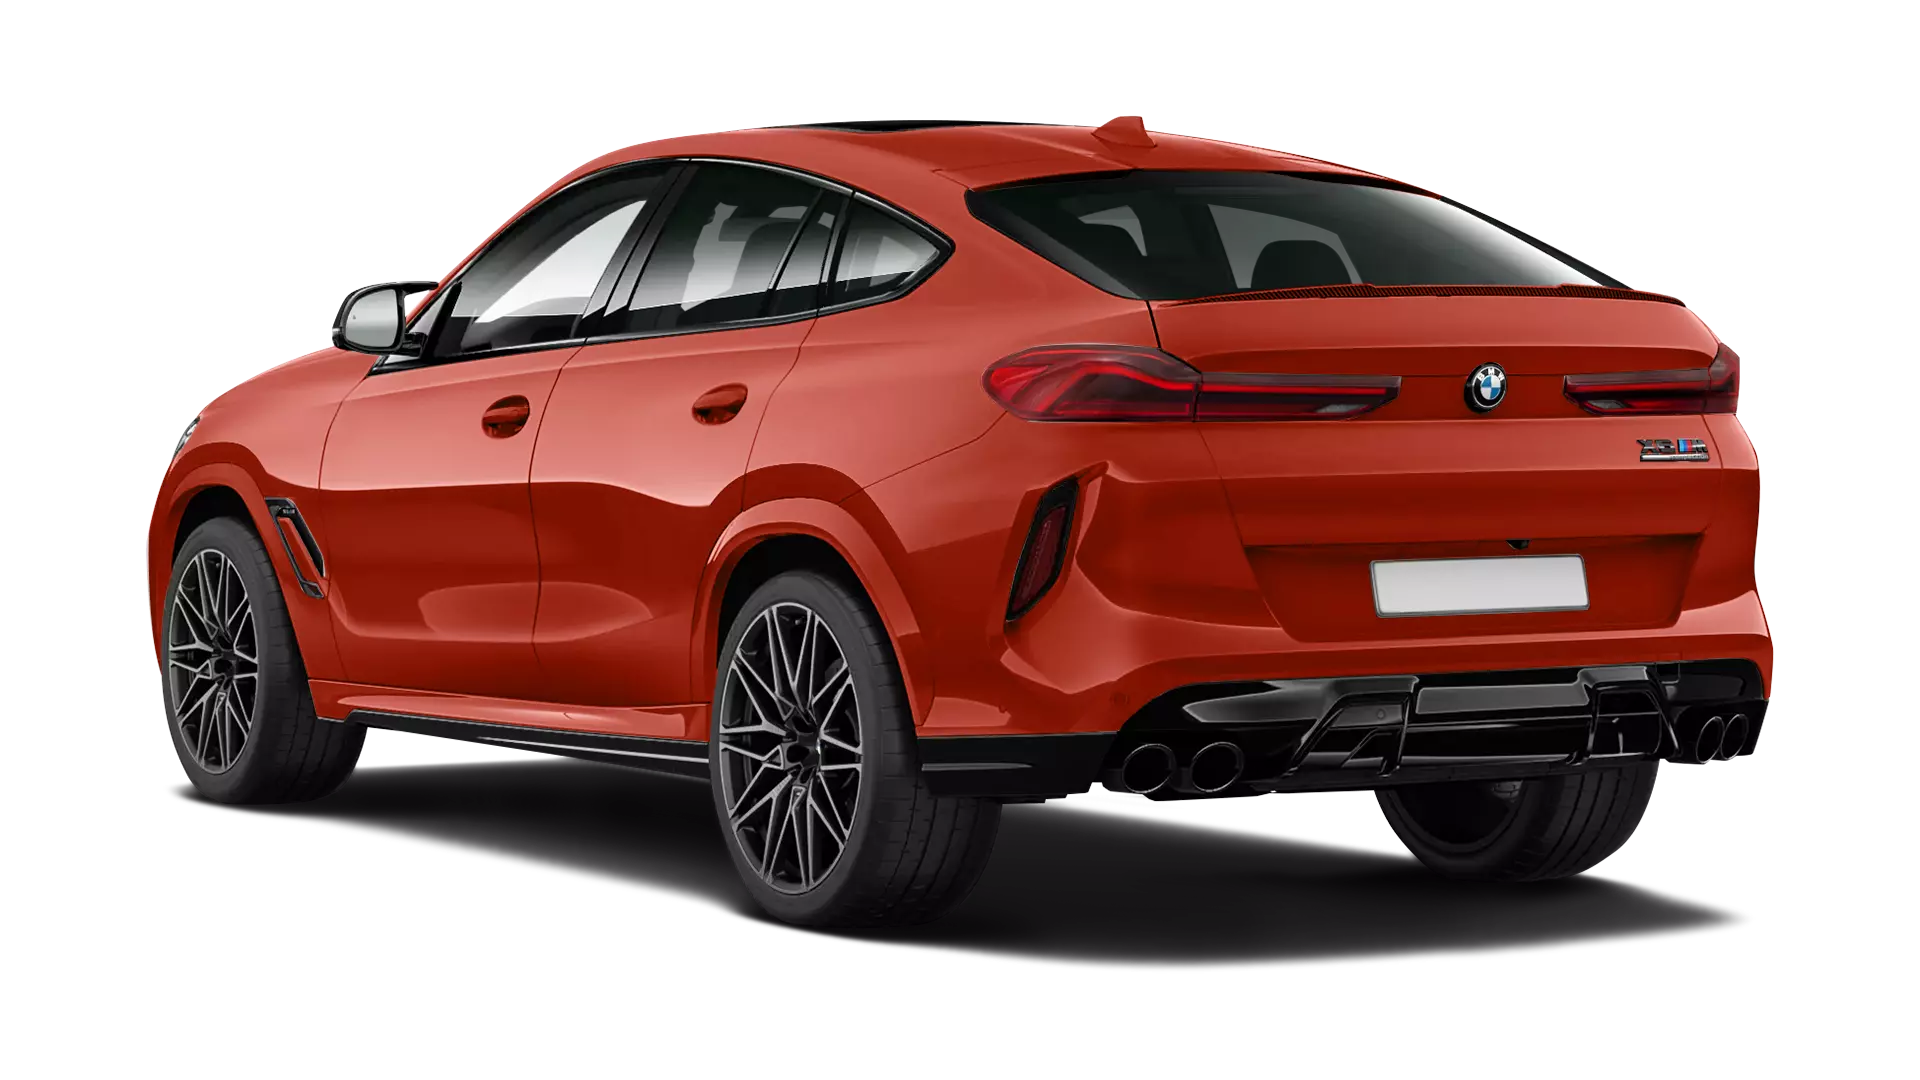 BMW X6M F96 stock rear view in toronto red